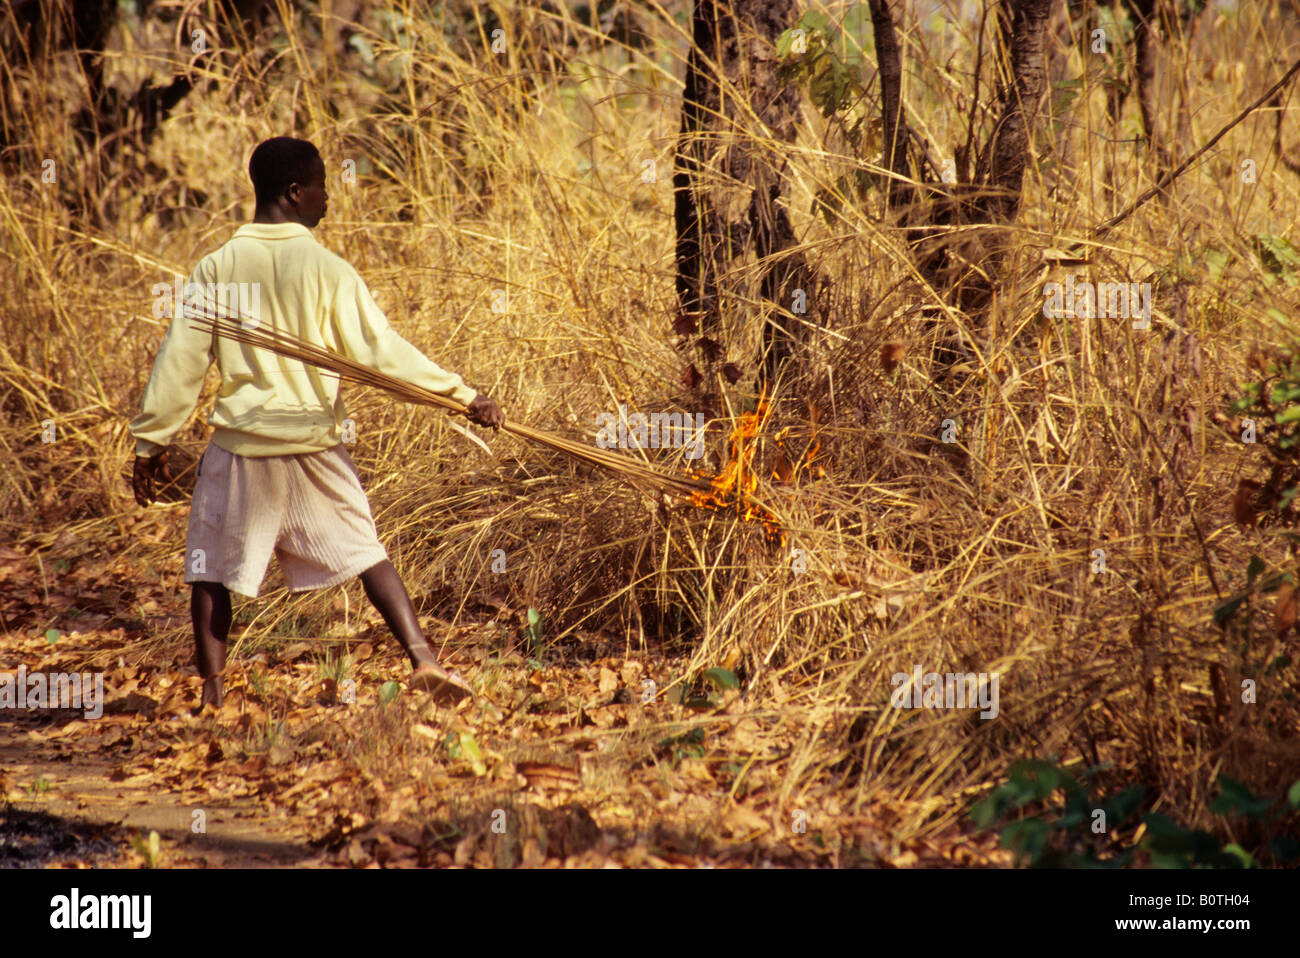 Western Ivory Coast, Cote d' Ivoire, West Africa.  Young Man Setting Bush Fire. Stock Photo